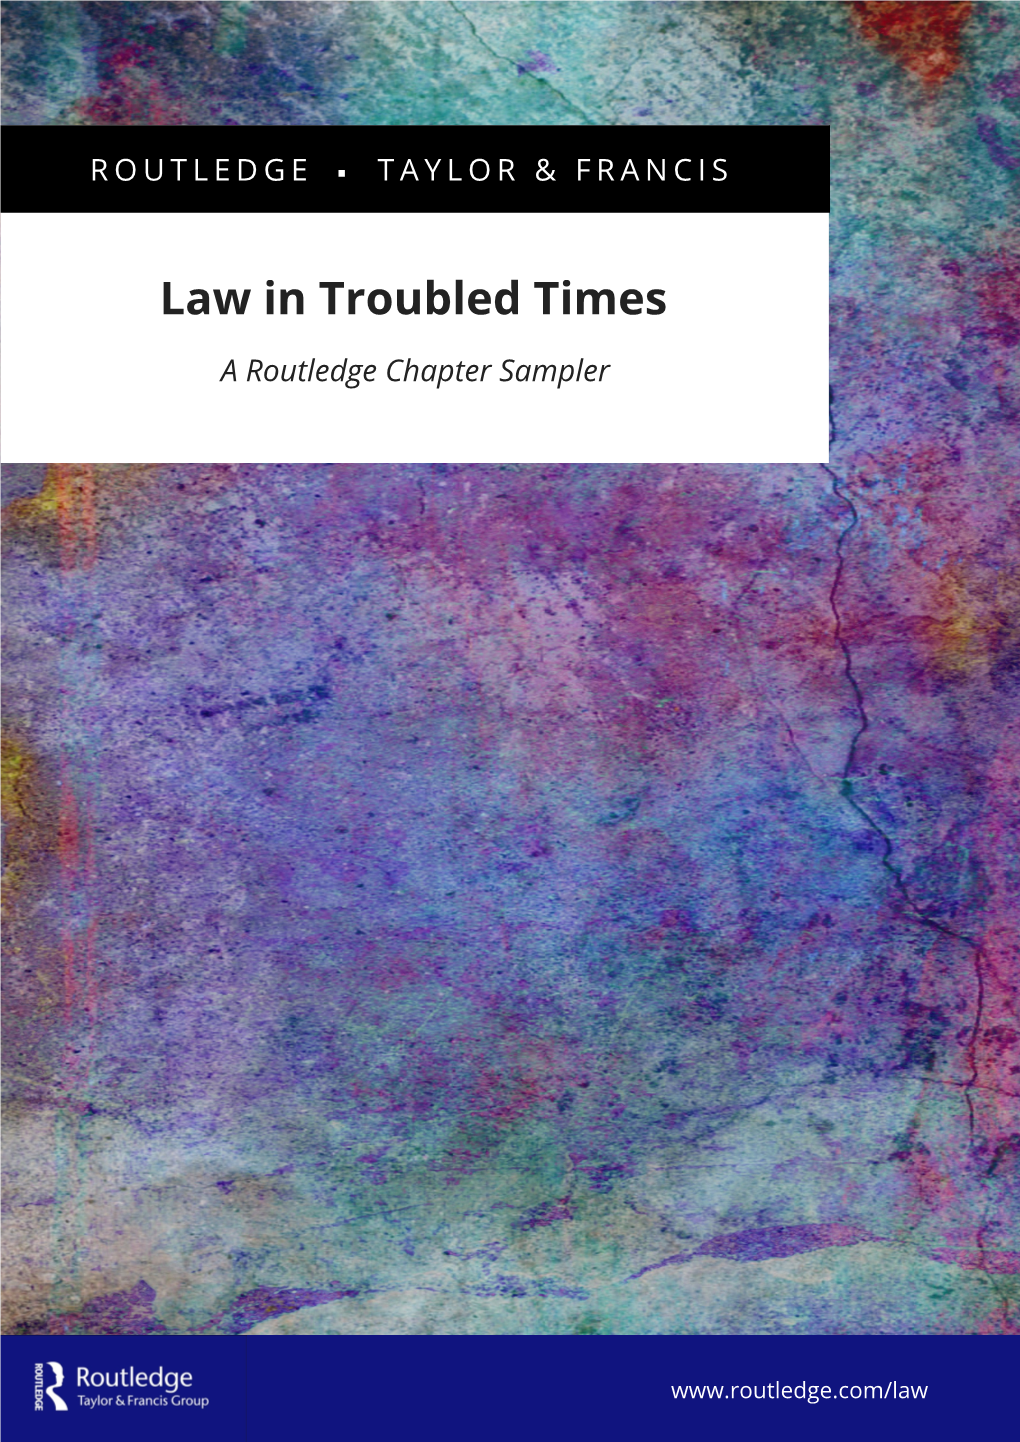 Law in Troubled Times